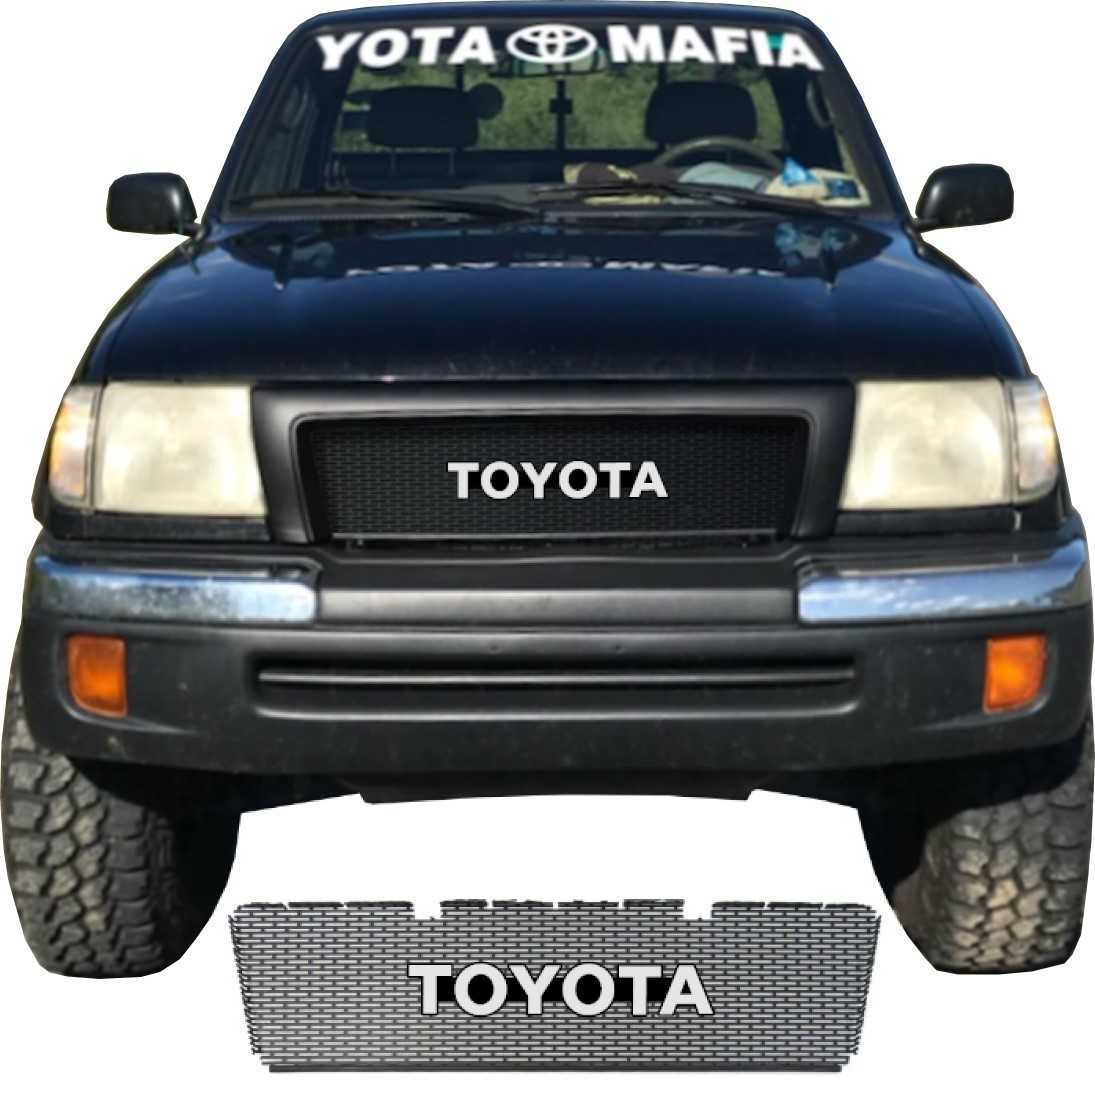 1998 - 2000 Toyota Tacoma Grill Mesh With Toyota Emblem